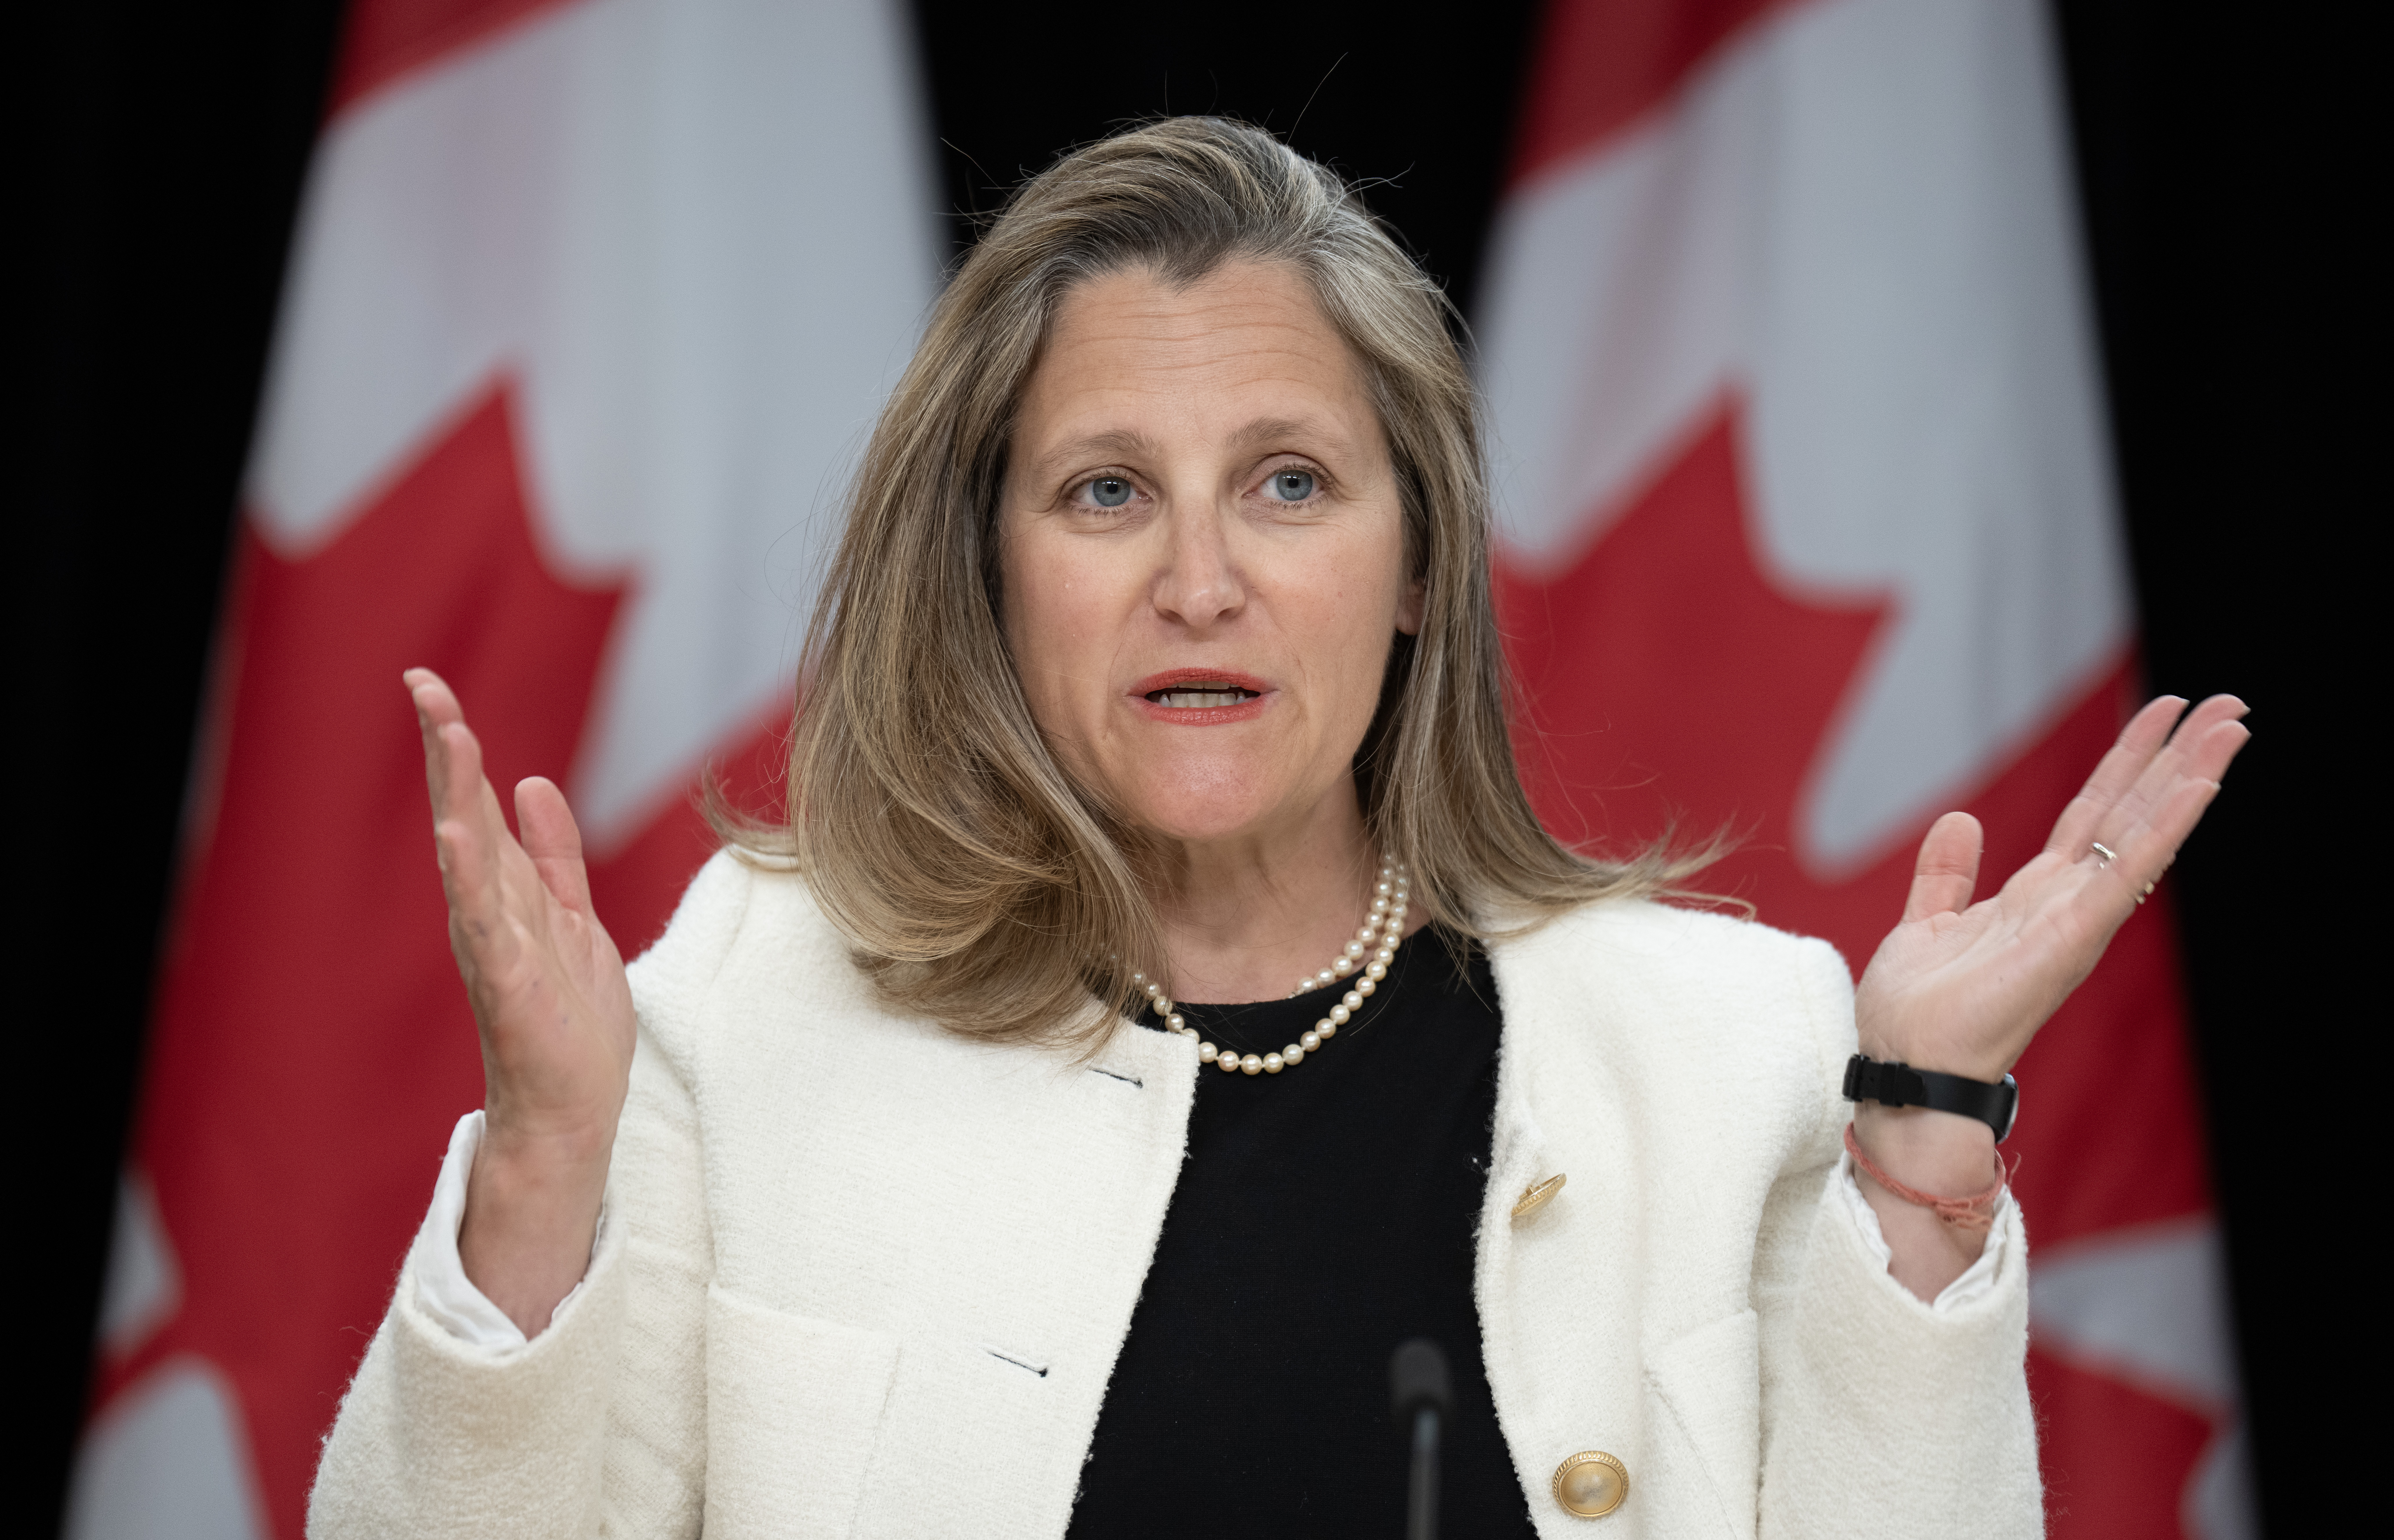 Few details from Freeland on ‘internal’ review into alleged colluders